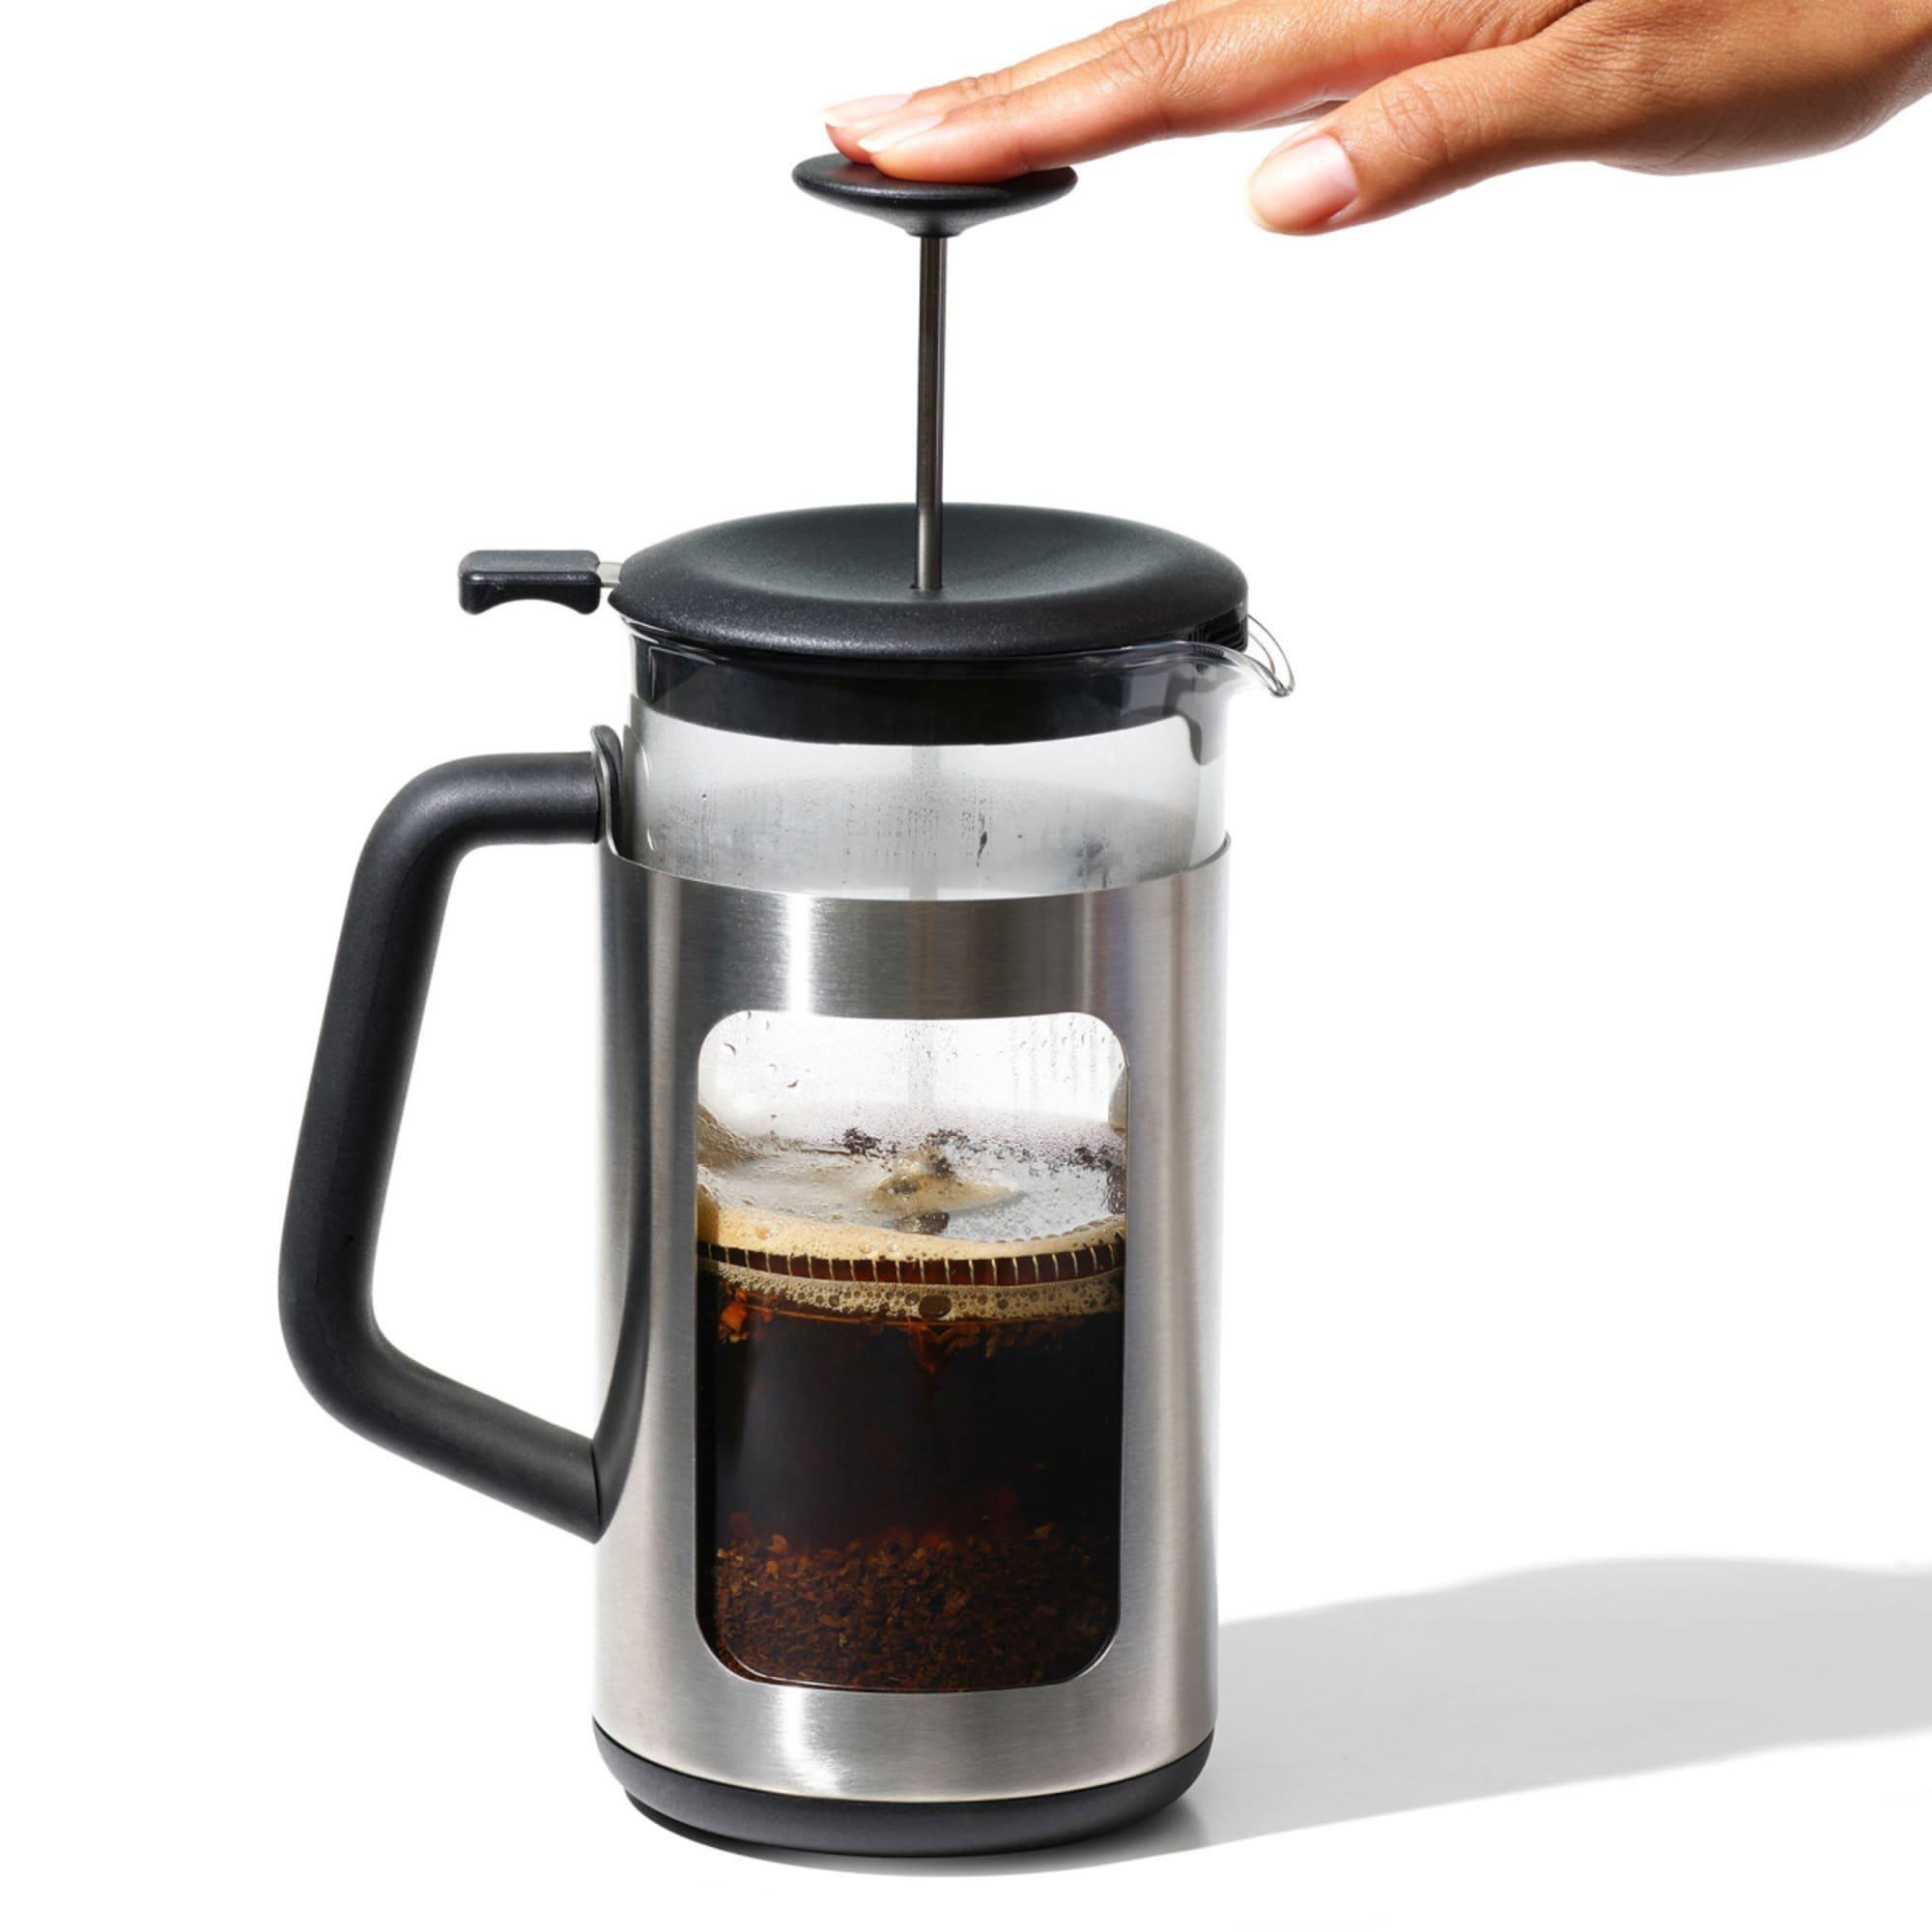 OXO Good Grips French Press with Grounds Lifter 8 Cup Image 5